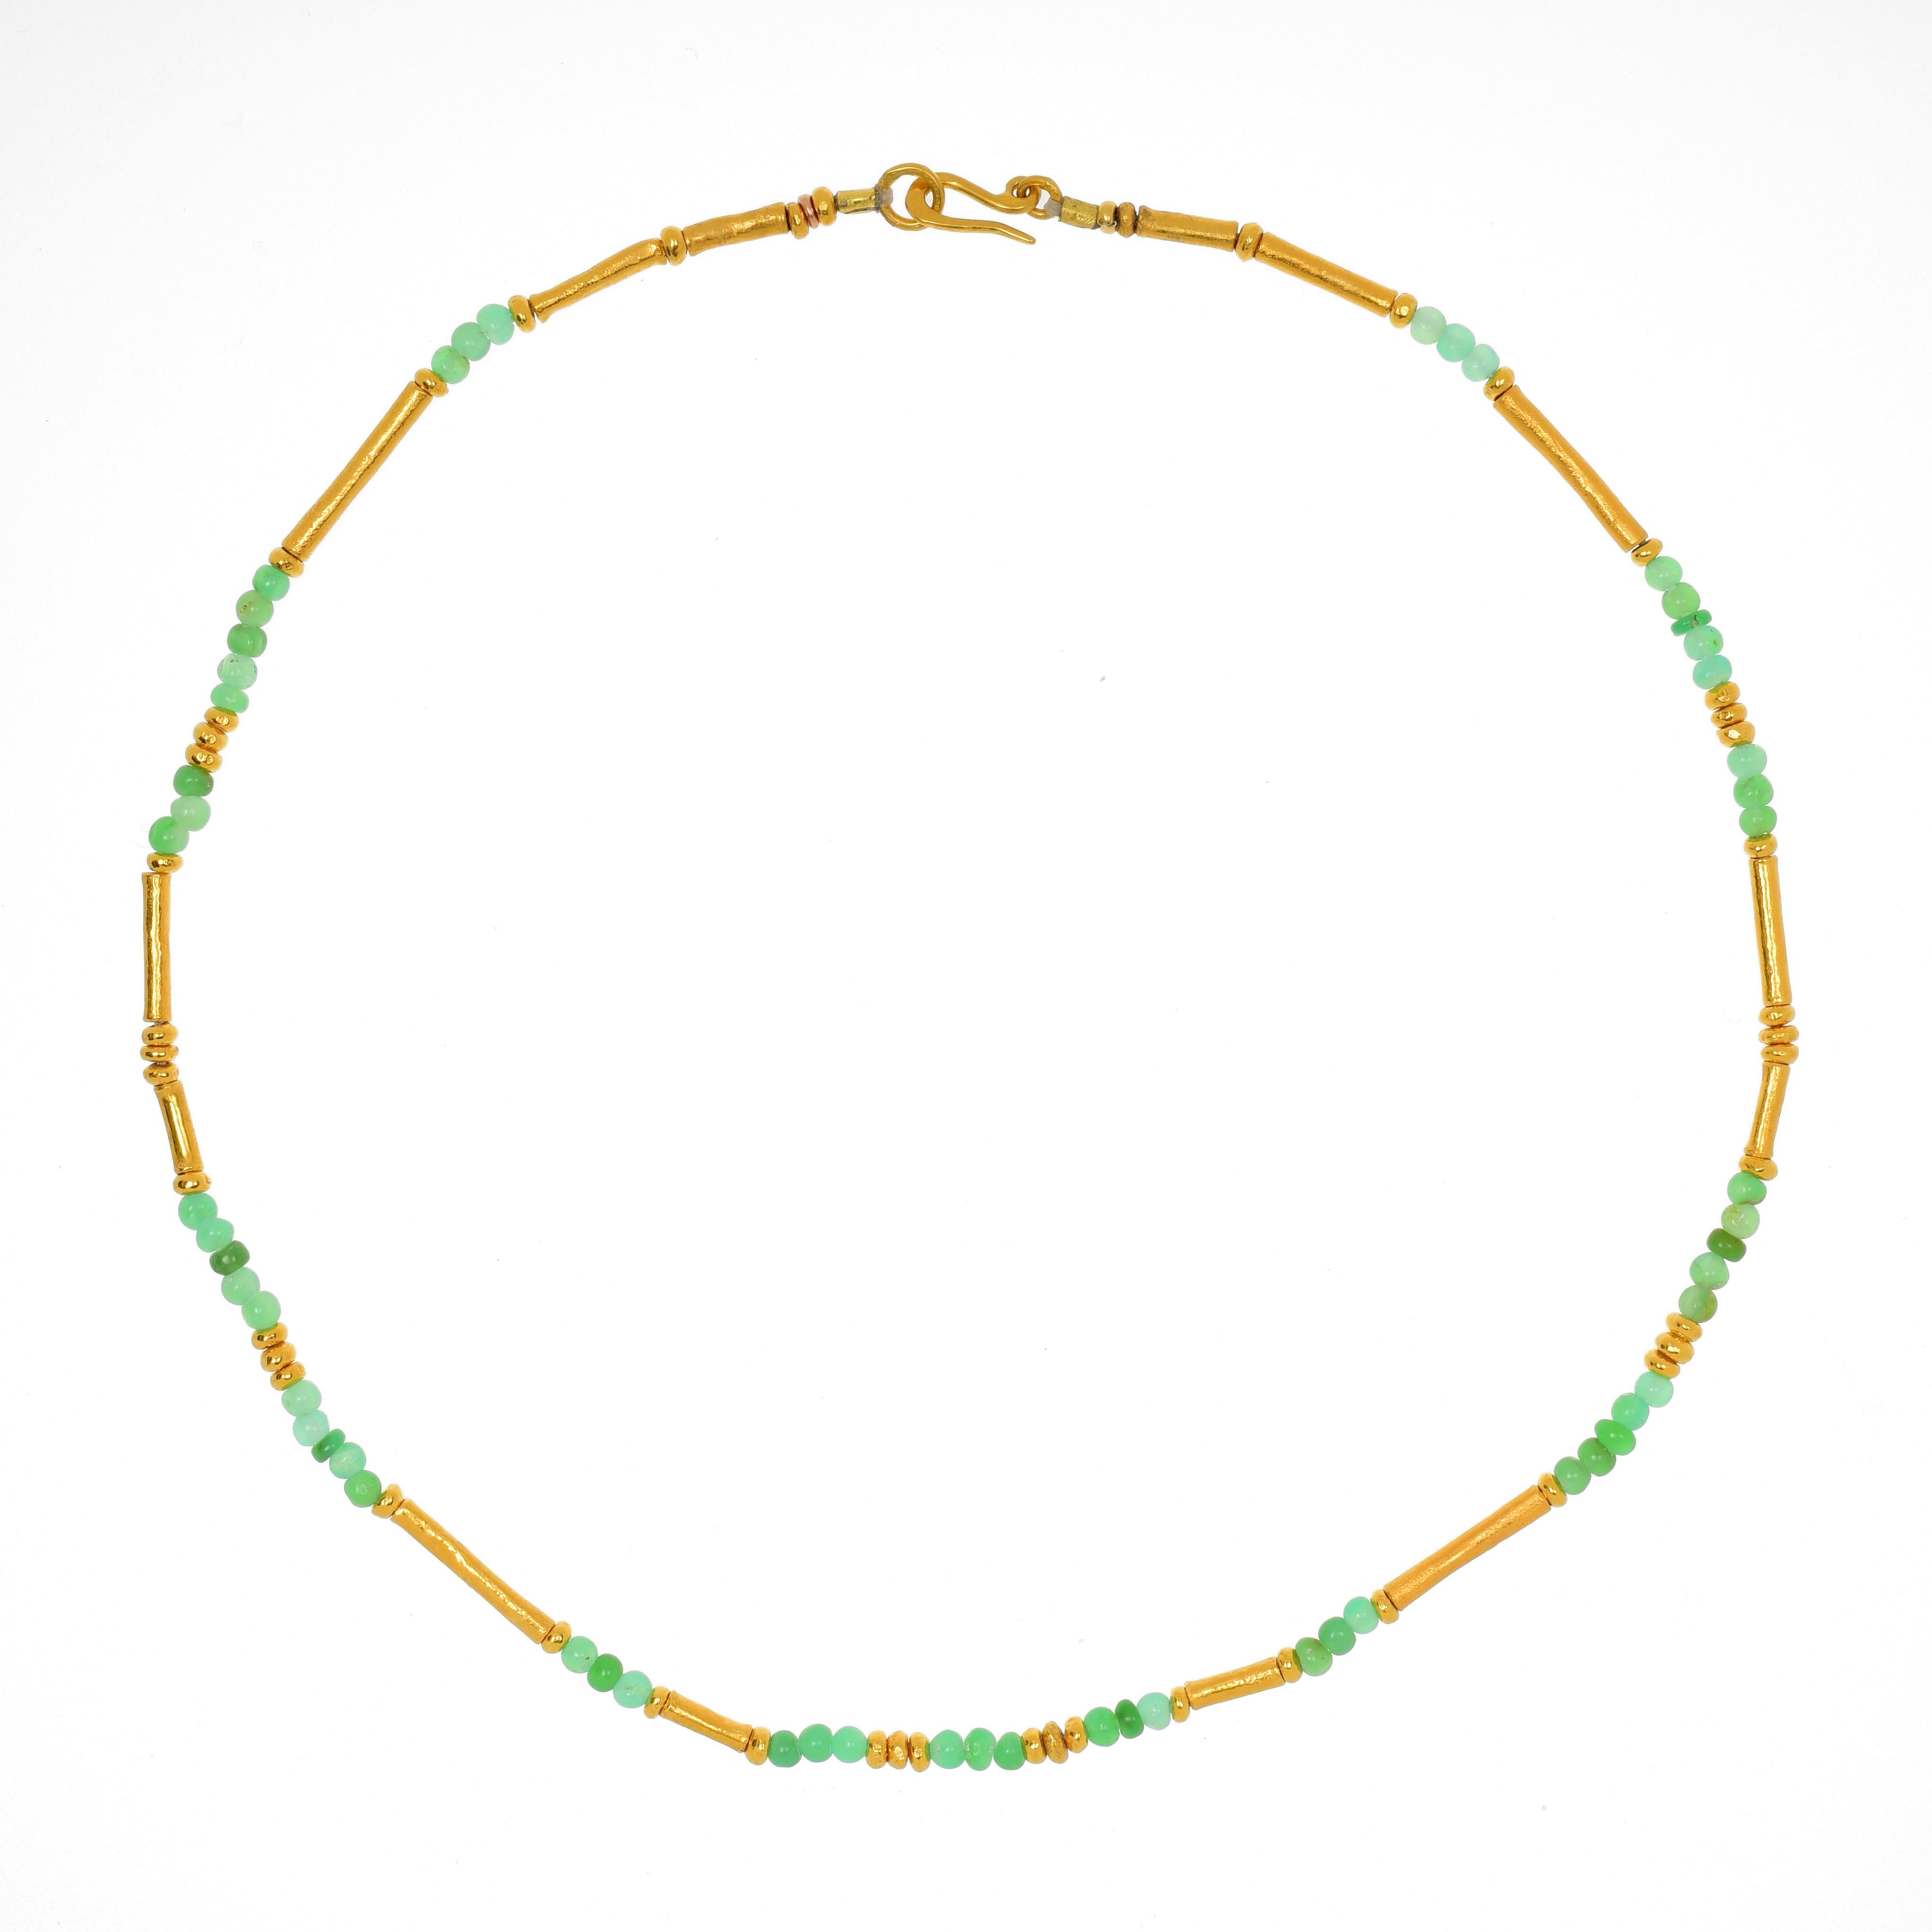 There is an ancient feel to this chrysophrase and gold vermeil necklace. With each metal bead having been hand crafted, it has a soft, organic feel around the neck. The s-clasp is easy to use and secure. 

Please don't hesitate to contact us if you